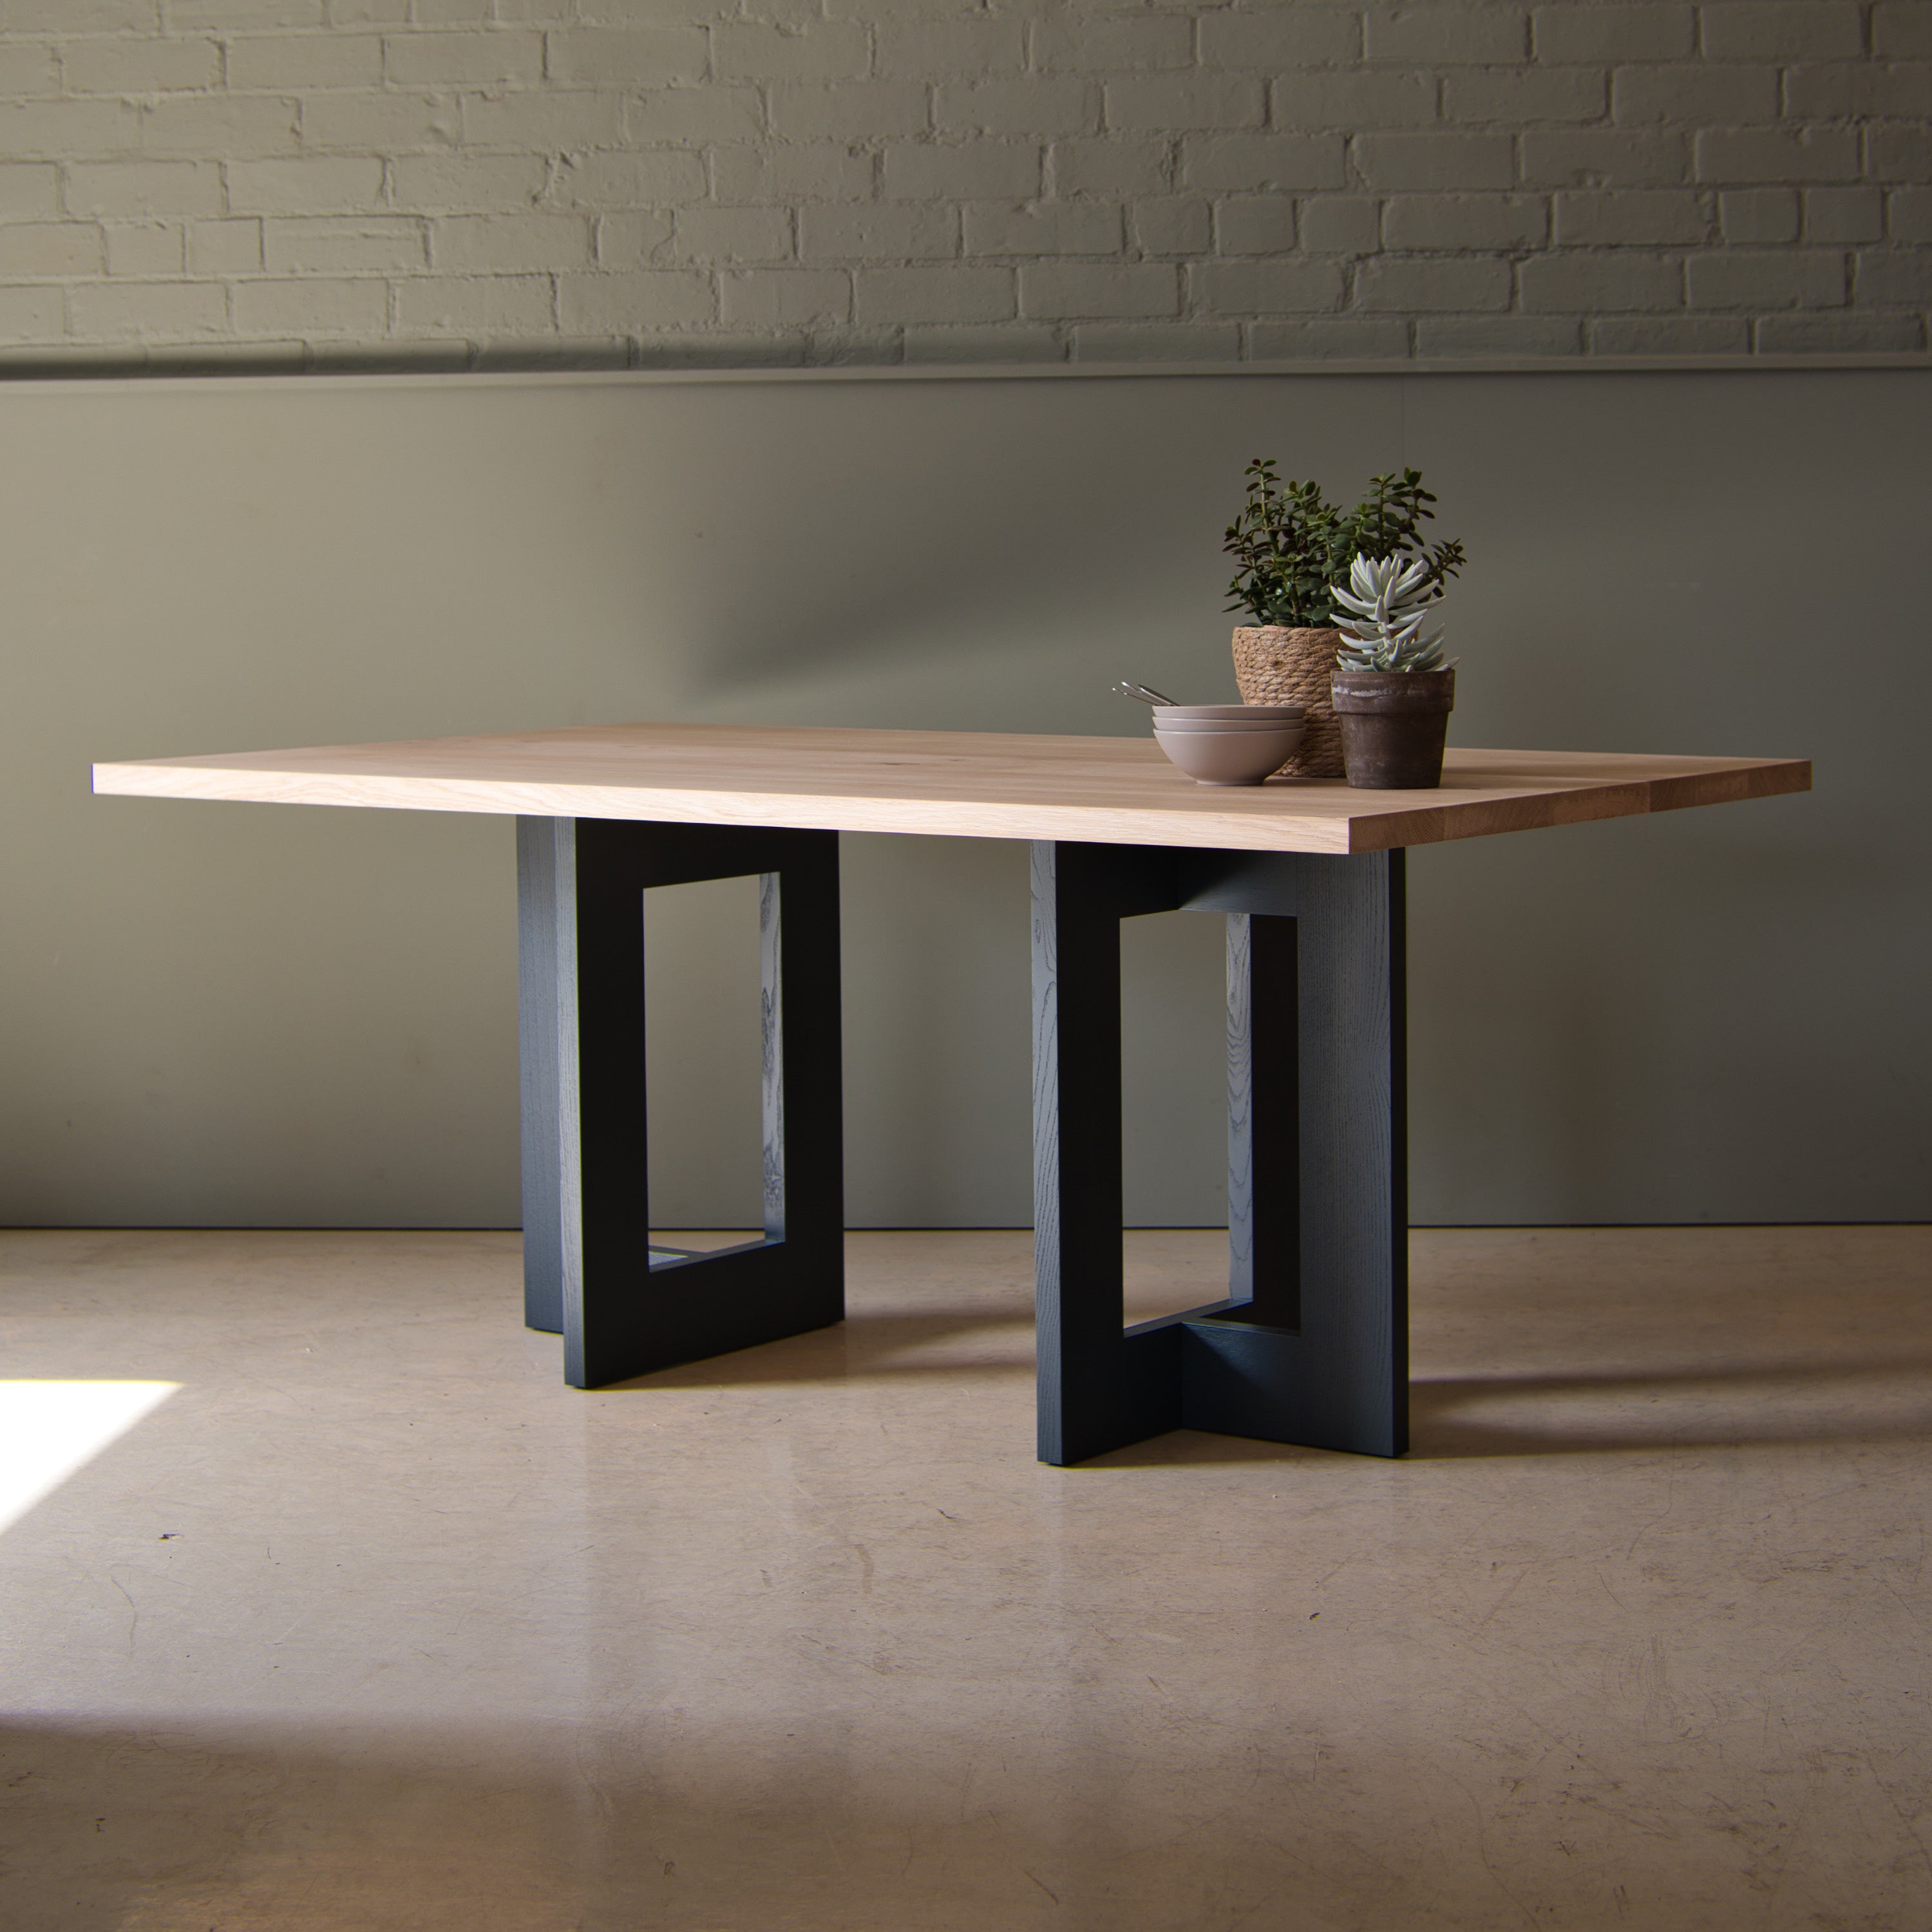 How to Choose a Dining Table, Oak Dining Table | KODA Studios